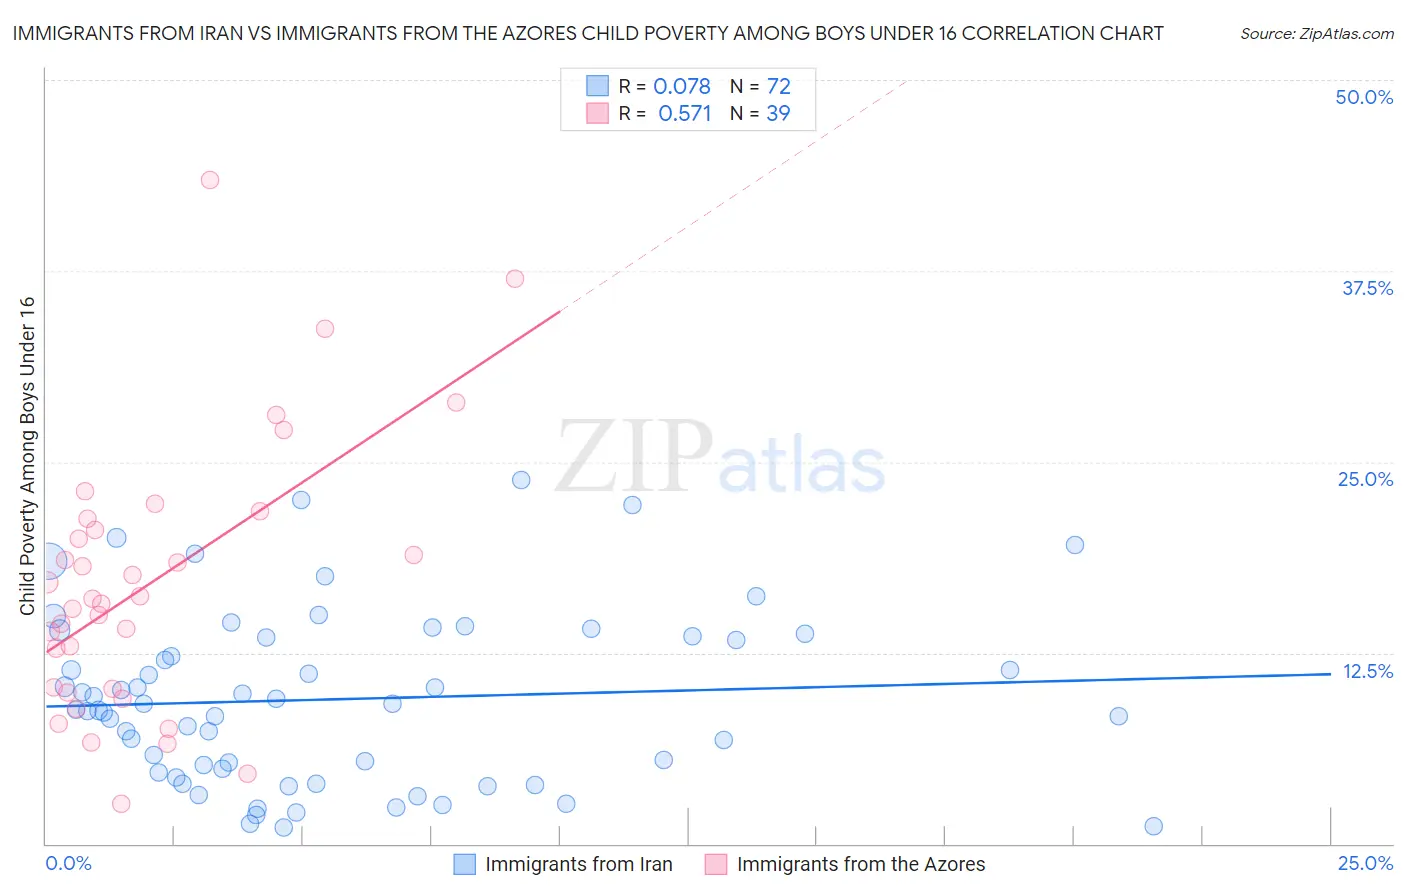 Immigrants from Iran vs Immigrants from the Azores Child Poverty Among Boys Under 16